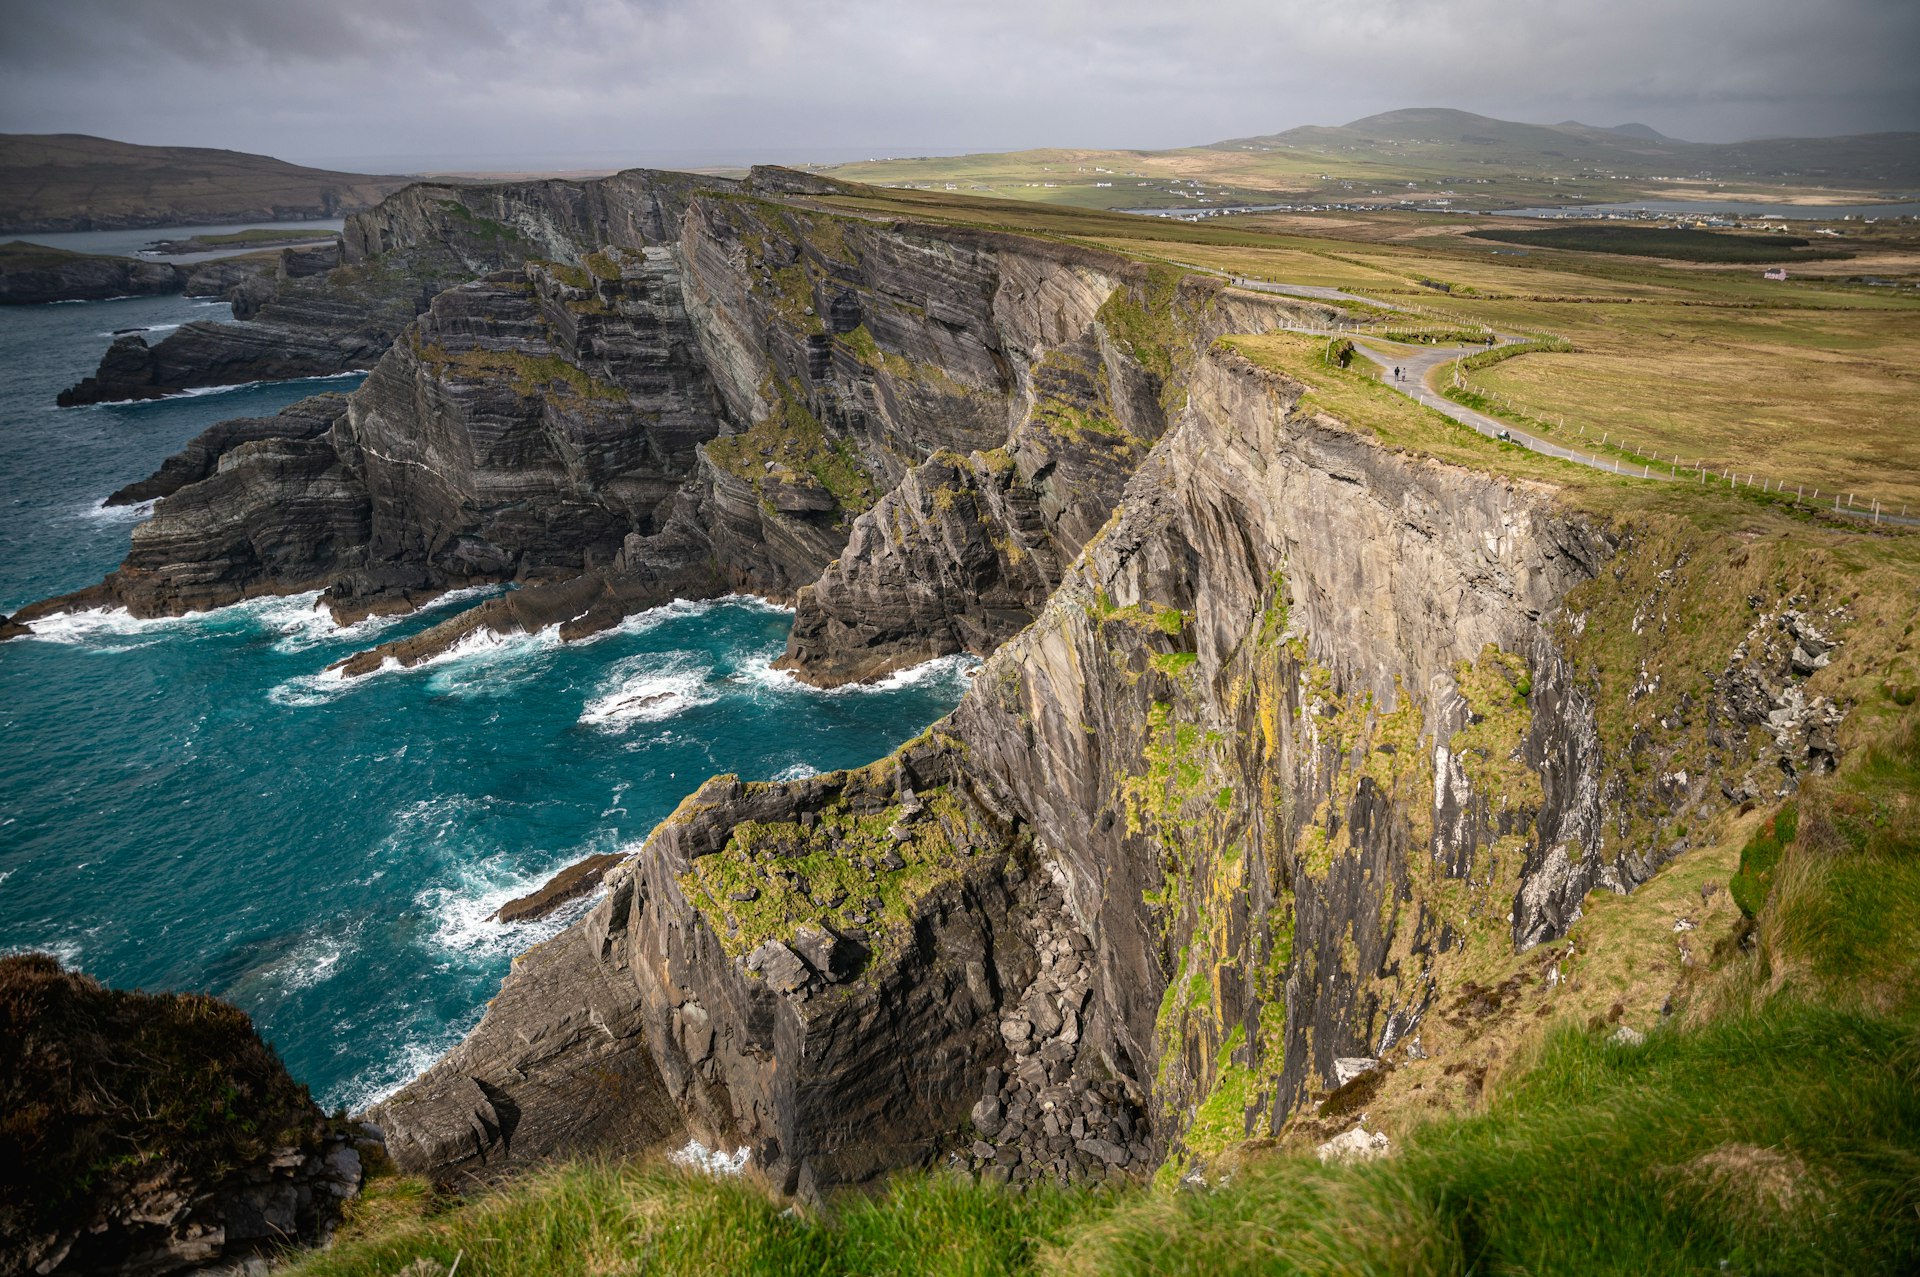 CliffsofKerry2.jpg